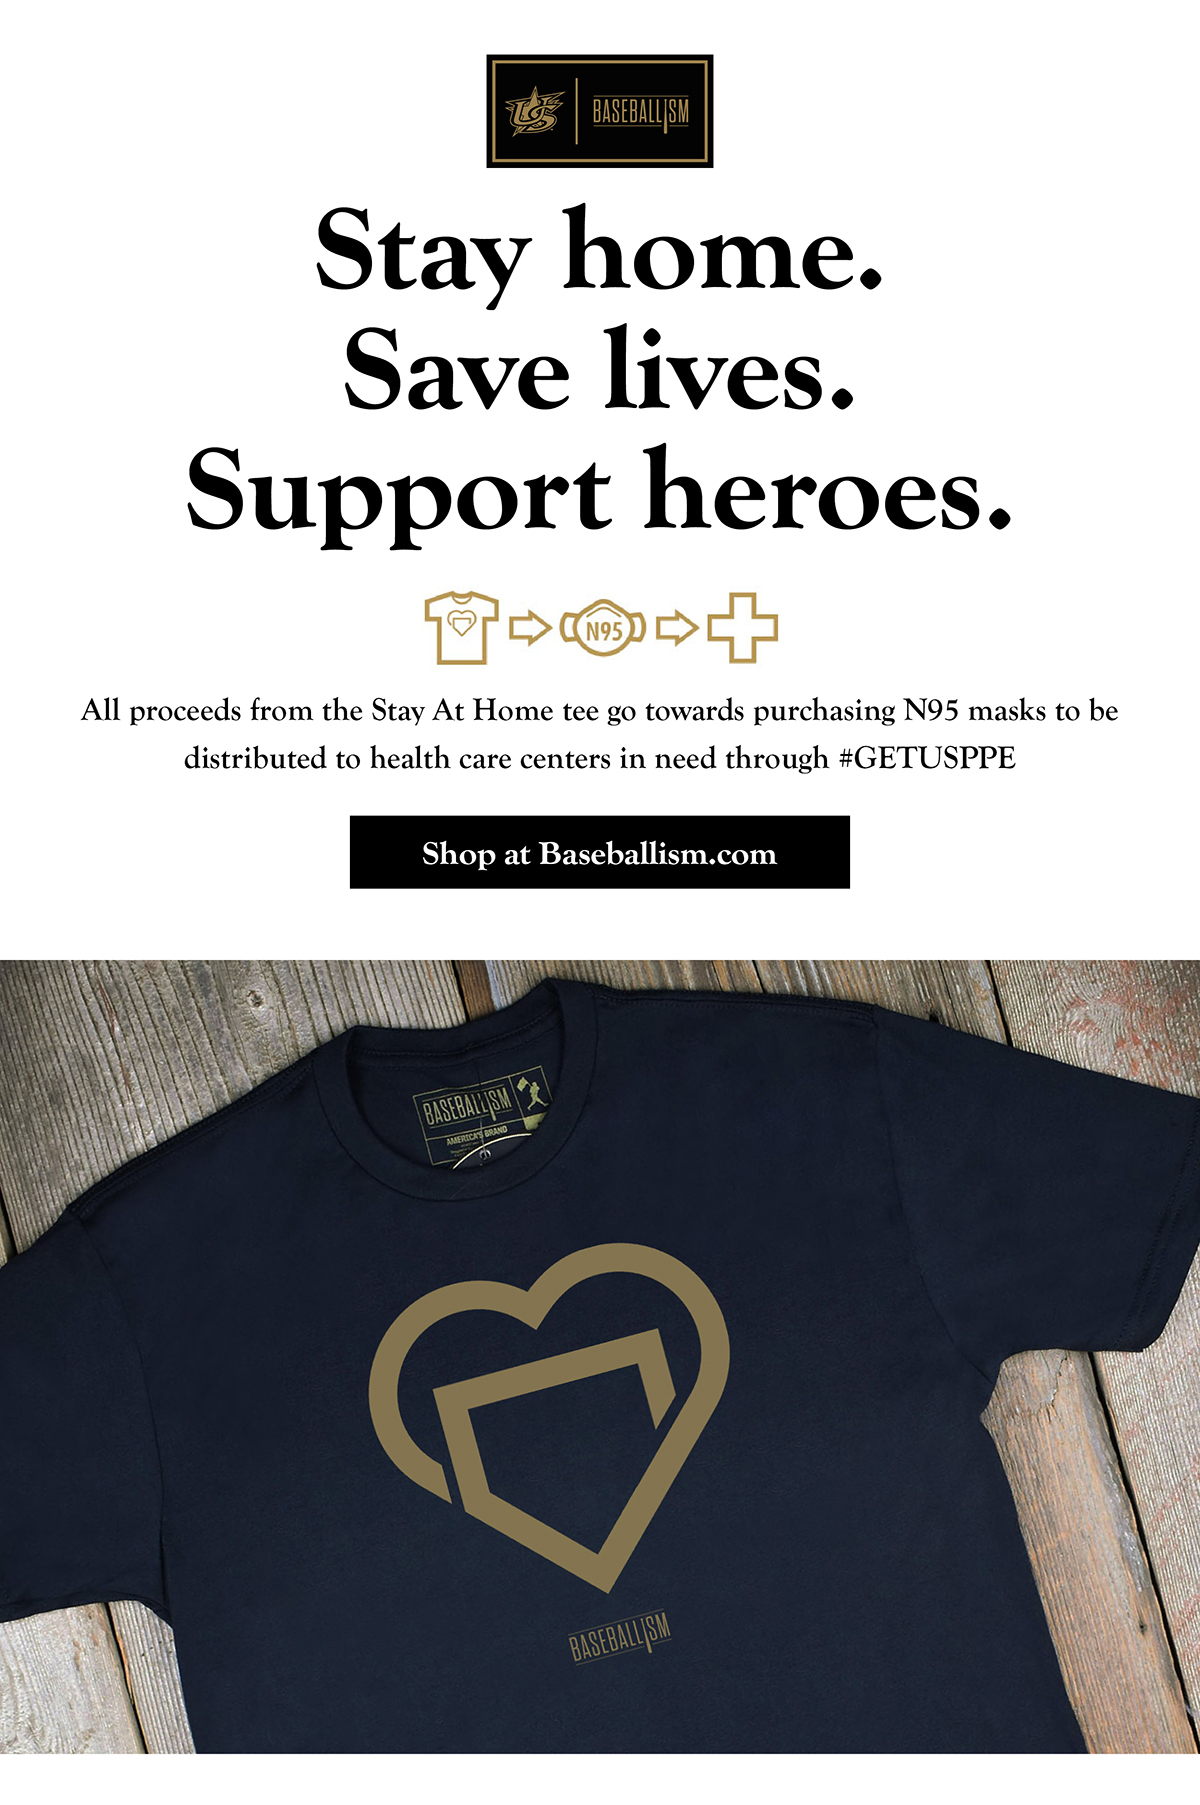 Stay home. Save lives. Support heroes.